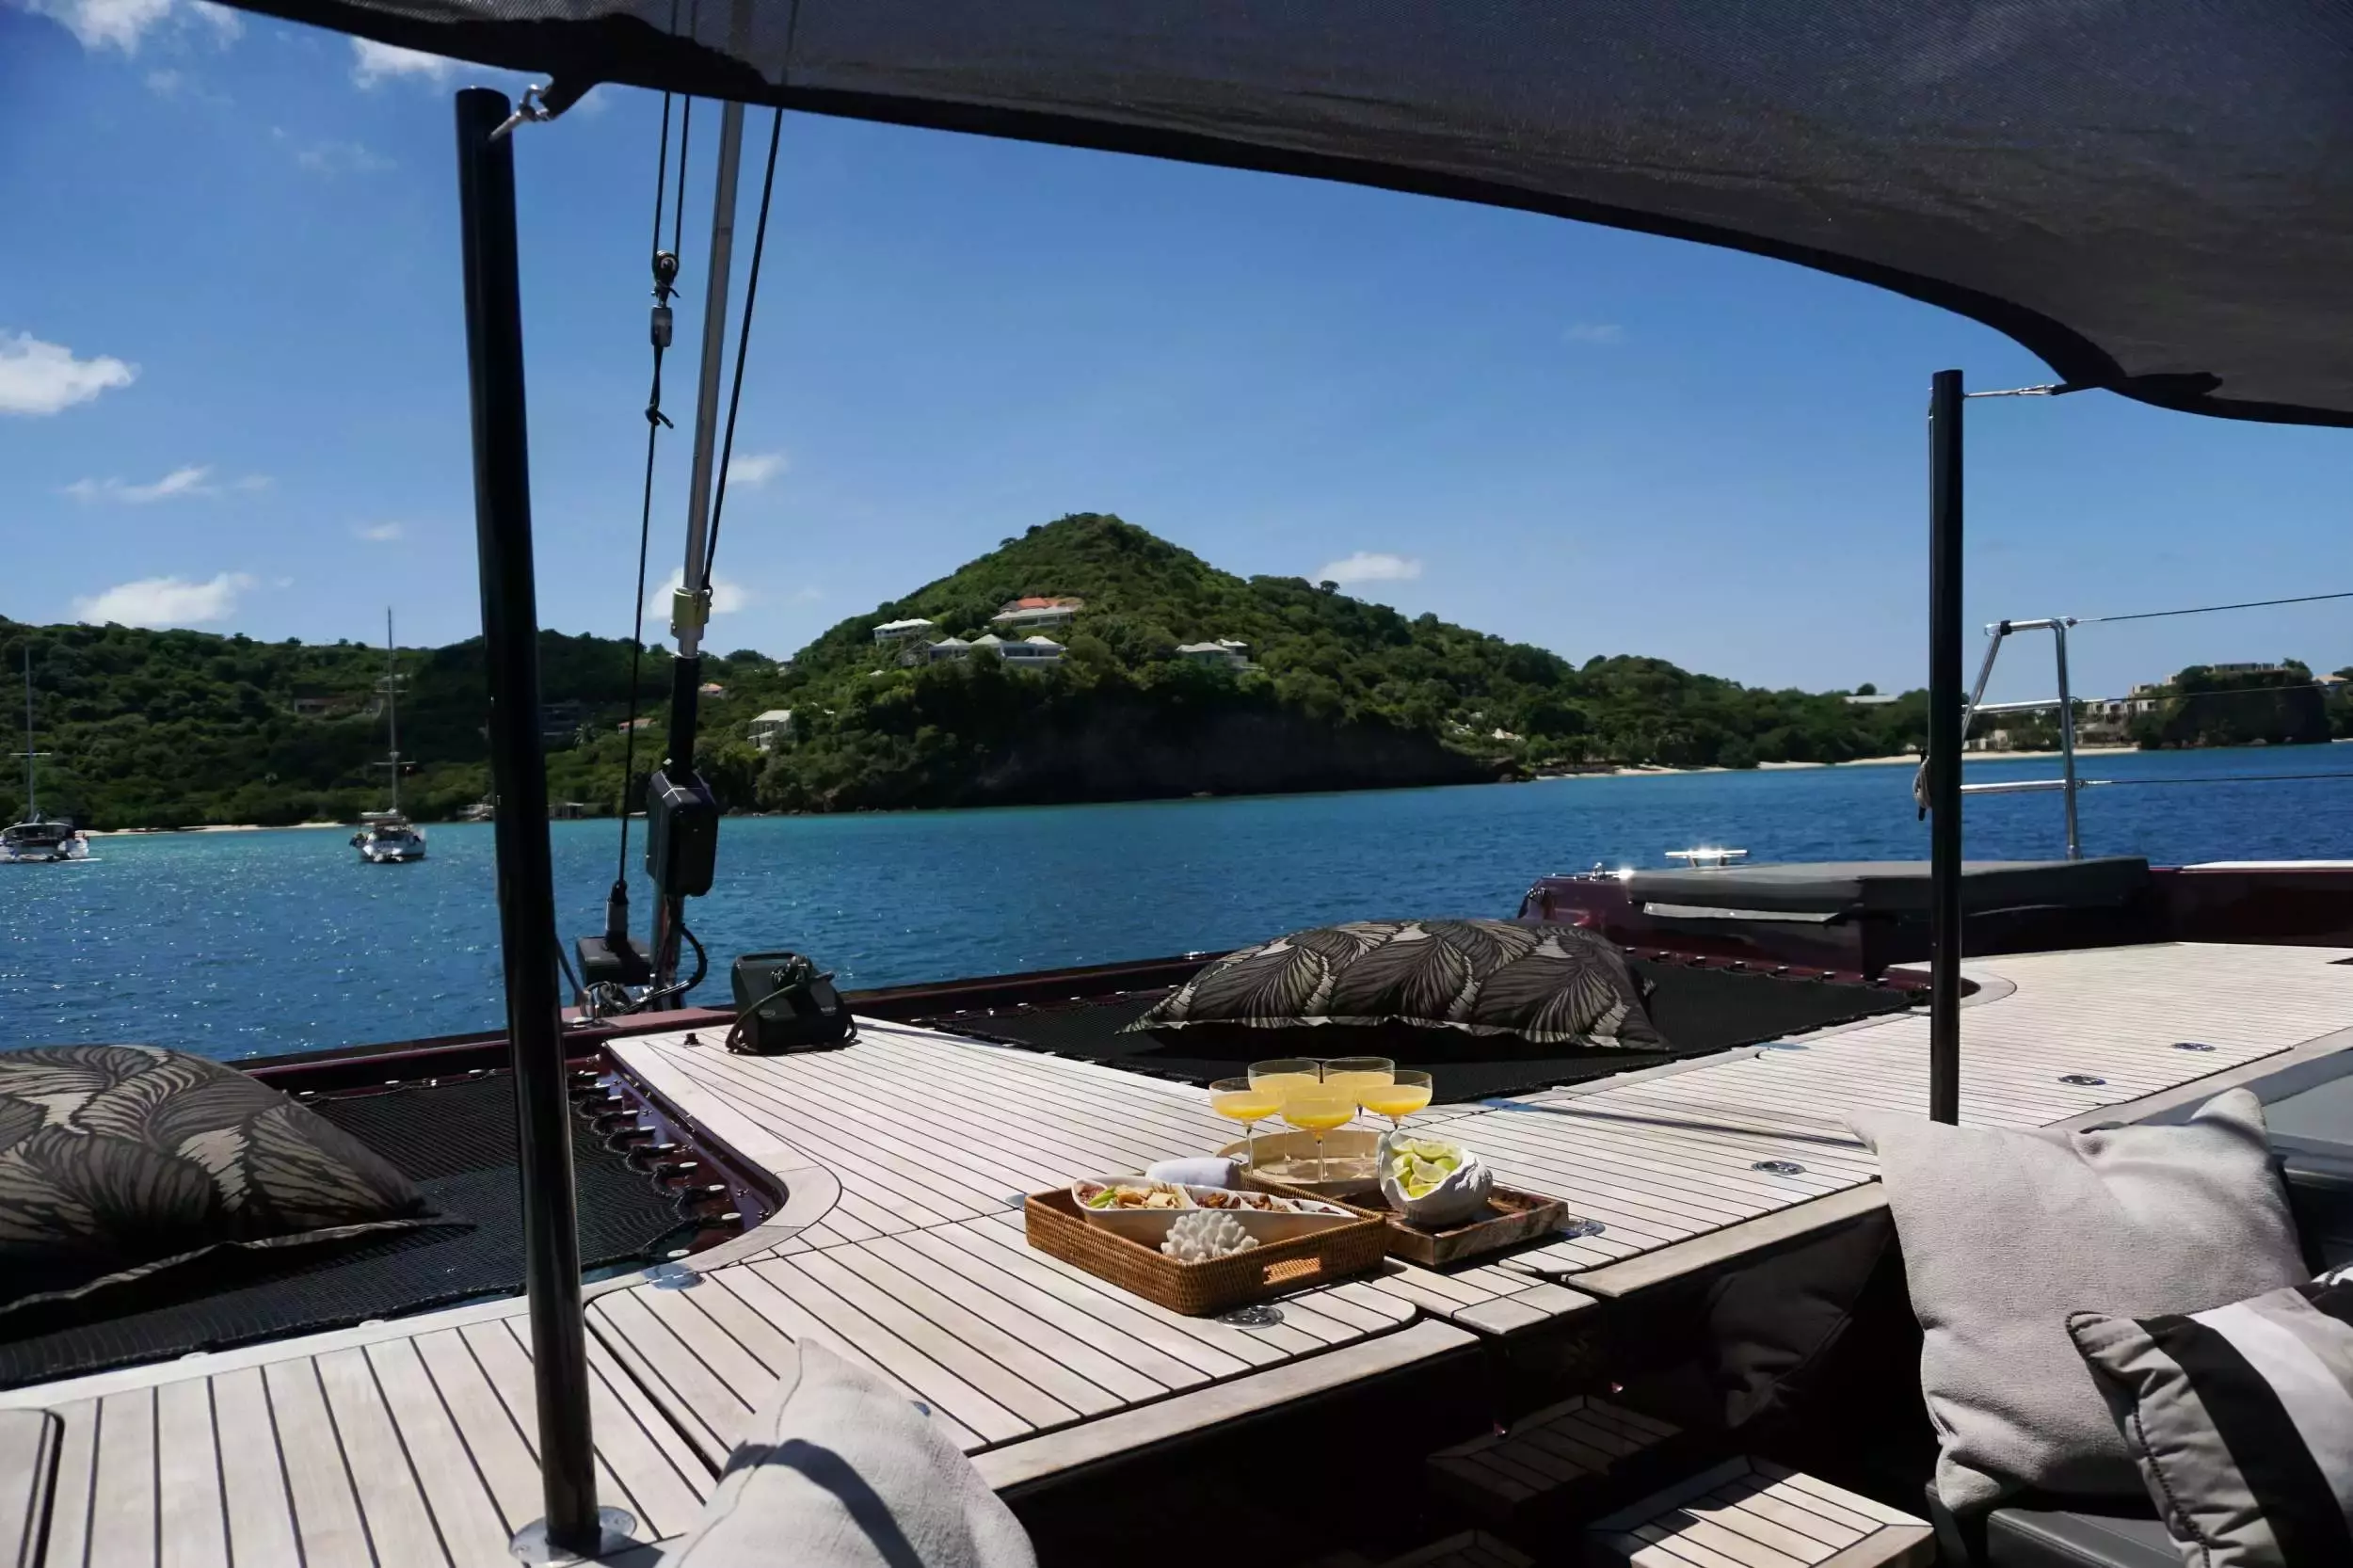 Lena by Sunreef Yachts - Top rates for a Rental of a private Luxury Catamaran in US Virgin Islands